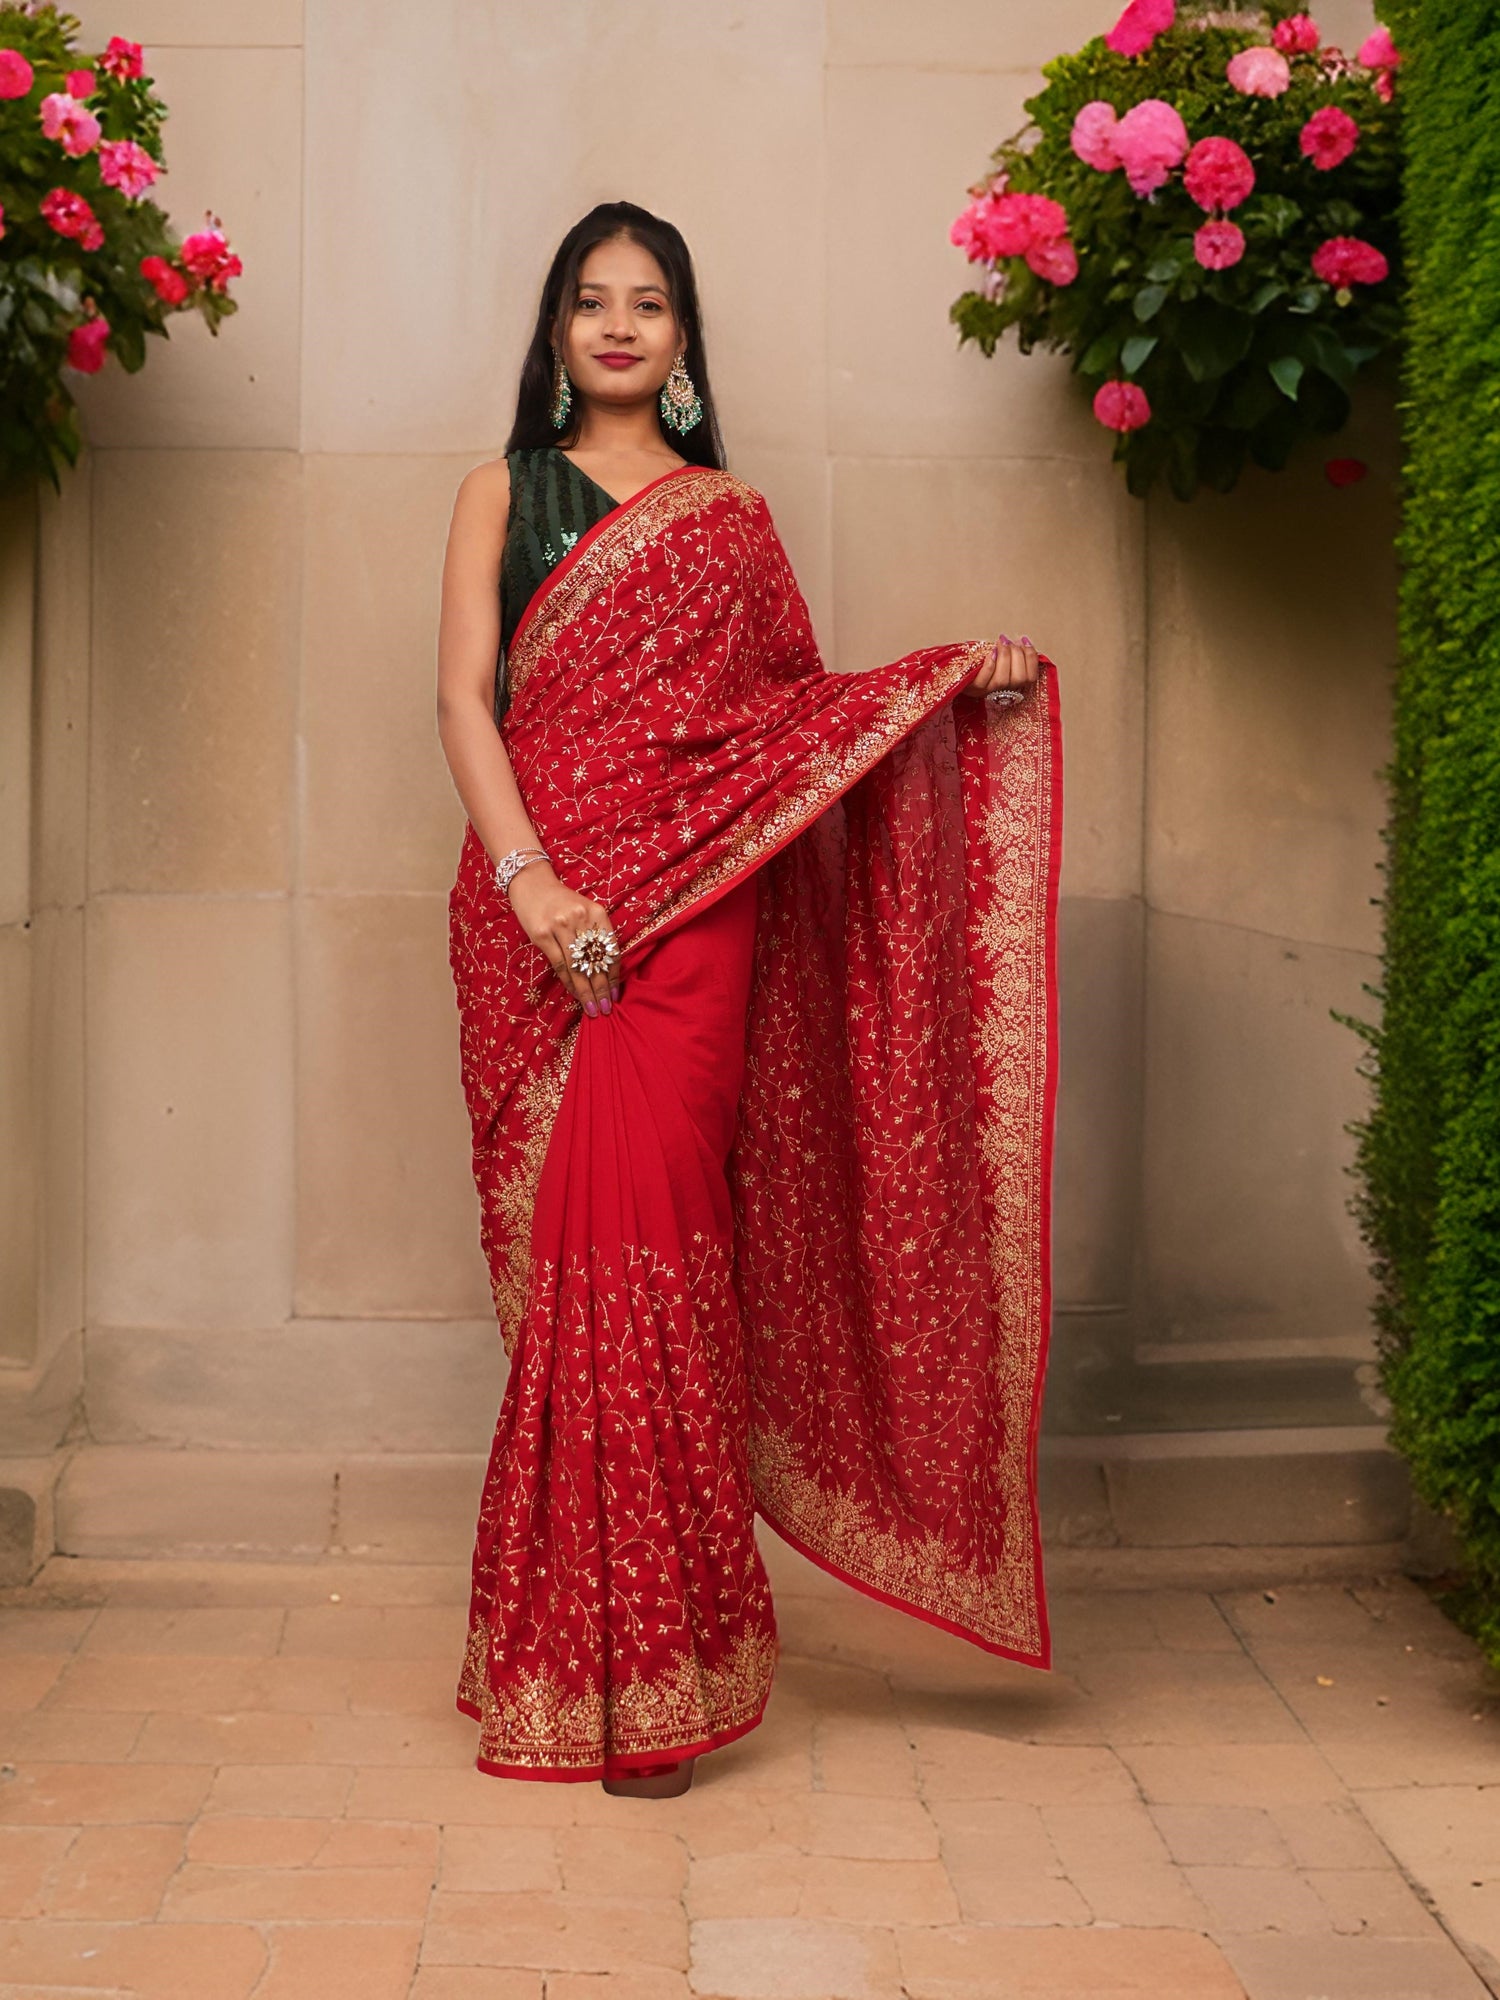 Designer Saree with Kundan &amp; Embroidery Work by Shreekama Red Designer Sarees for Party Festival Wedding Occasion in Noida